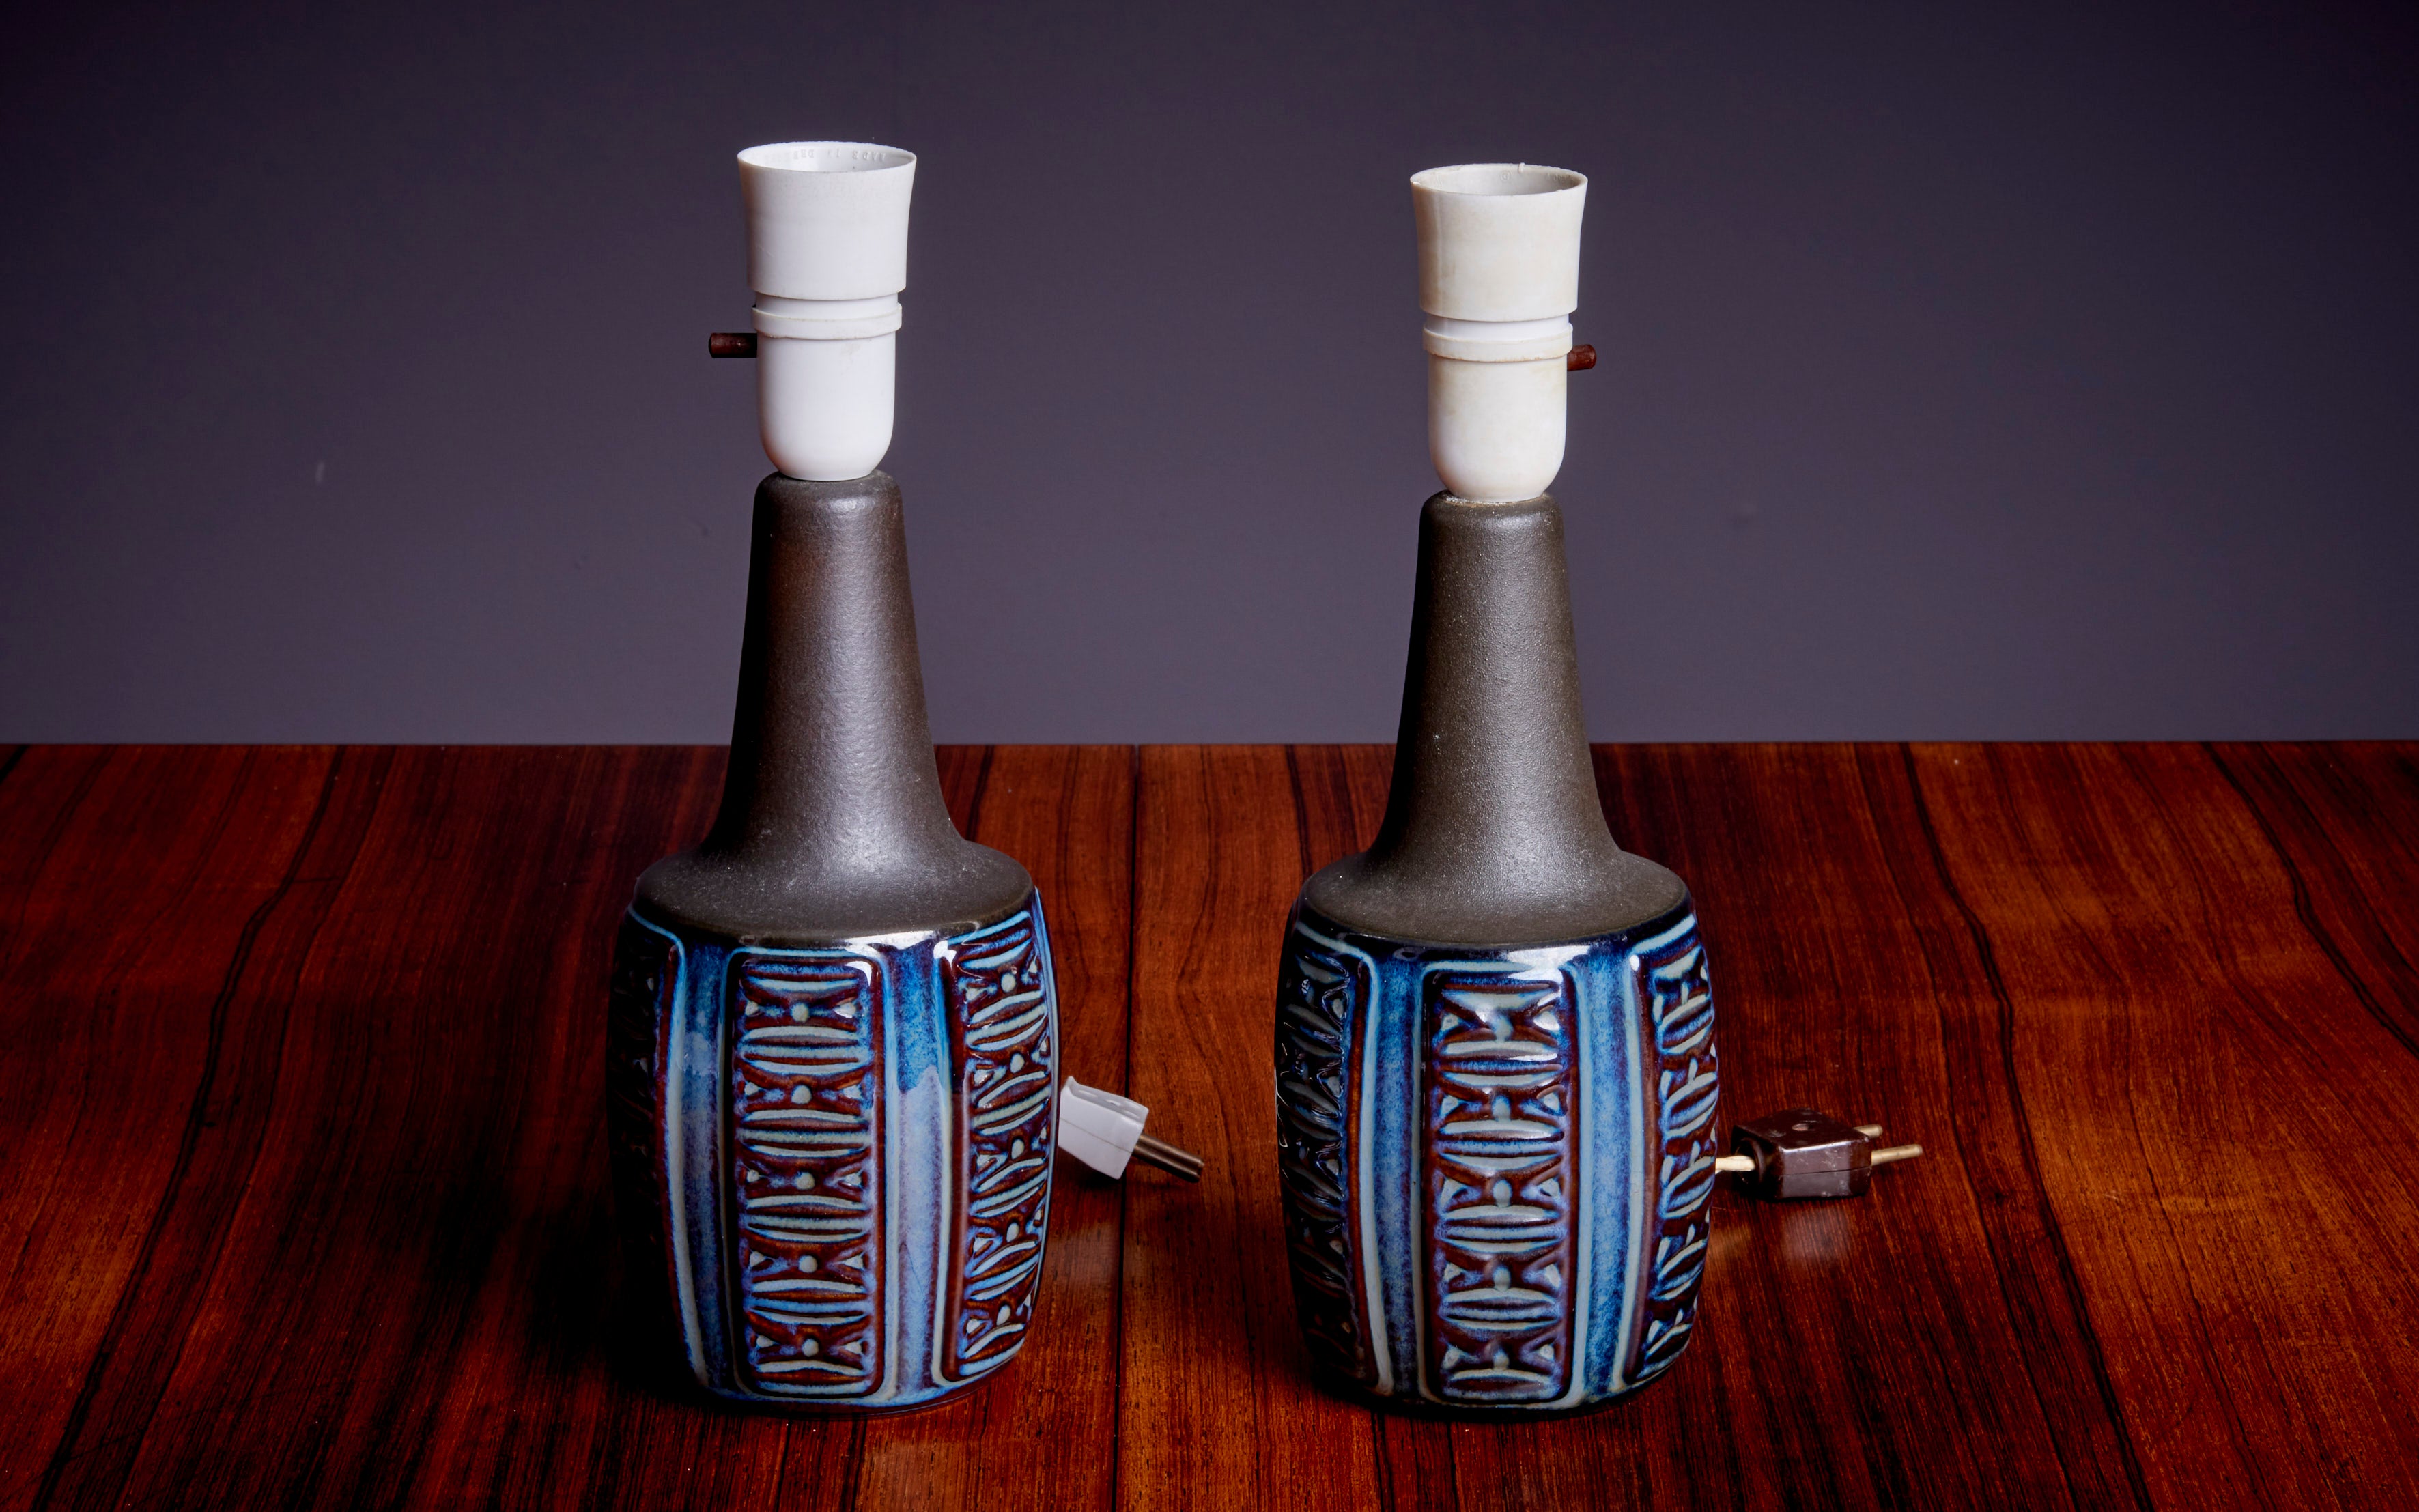 Pair of Ceramic table lamps by Soholm, Denmark - 1960s. The lamps are being sold without shade. The measurements given apply to the lampstand. 

Søholm Stentøj, also known as Søholm Stoneware, is a Danish ceramics company that was founded in 1835